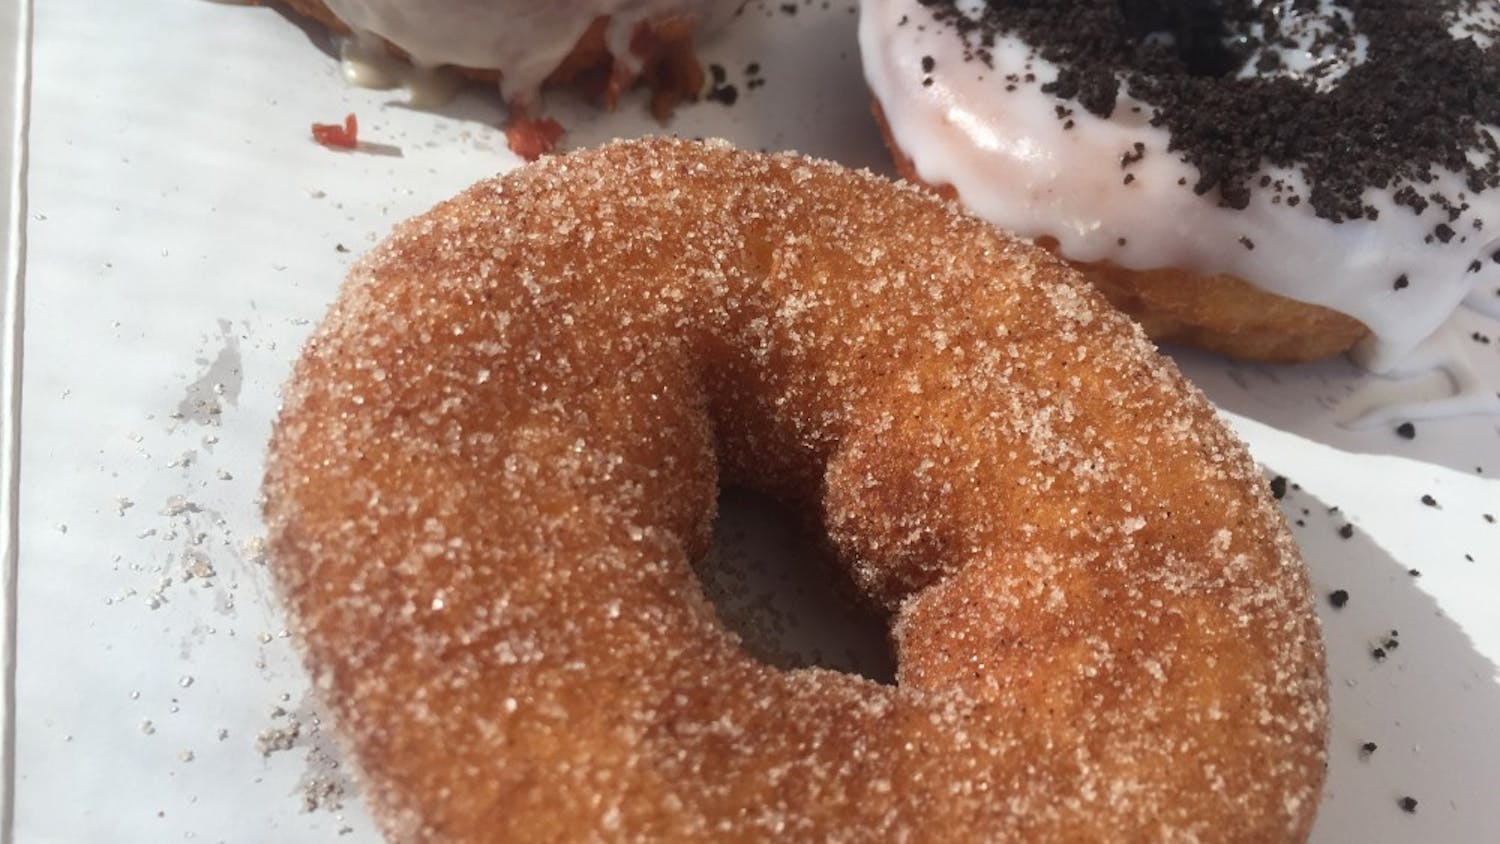 Duck Donuts provides timeless classics, unique new flavors and customizable options.